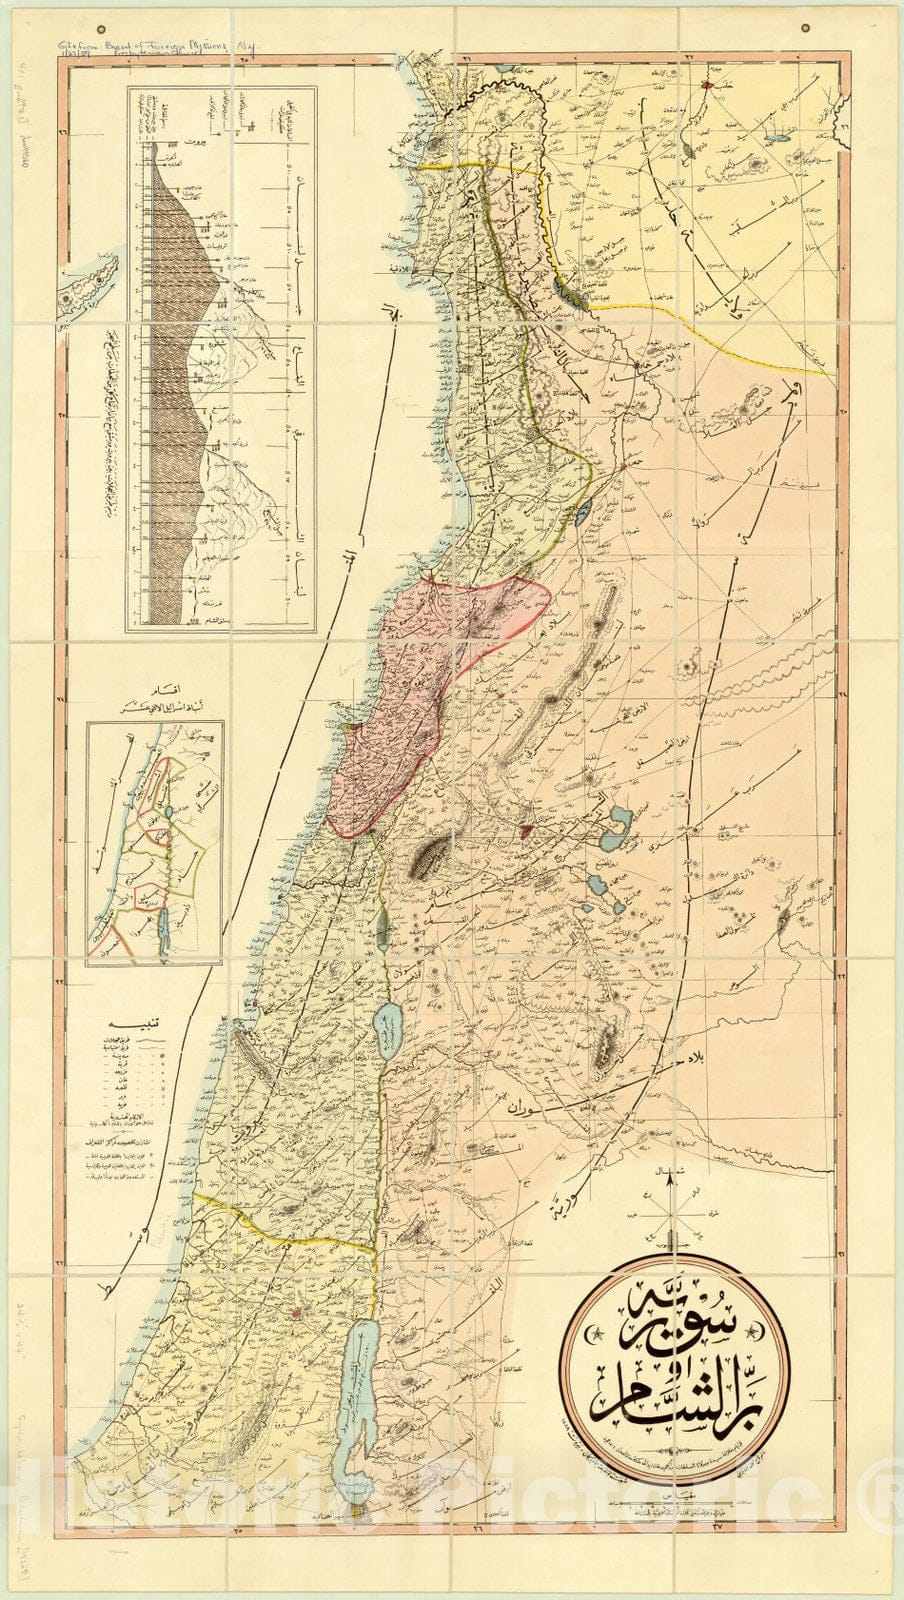 Map : Syria, Lebanon and Palestine 1920?, [Syria, Lebanon and Palestine], Antique Vintage Reproduction